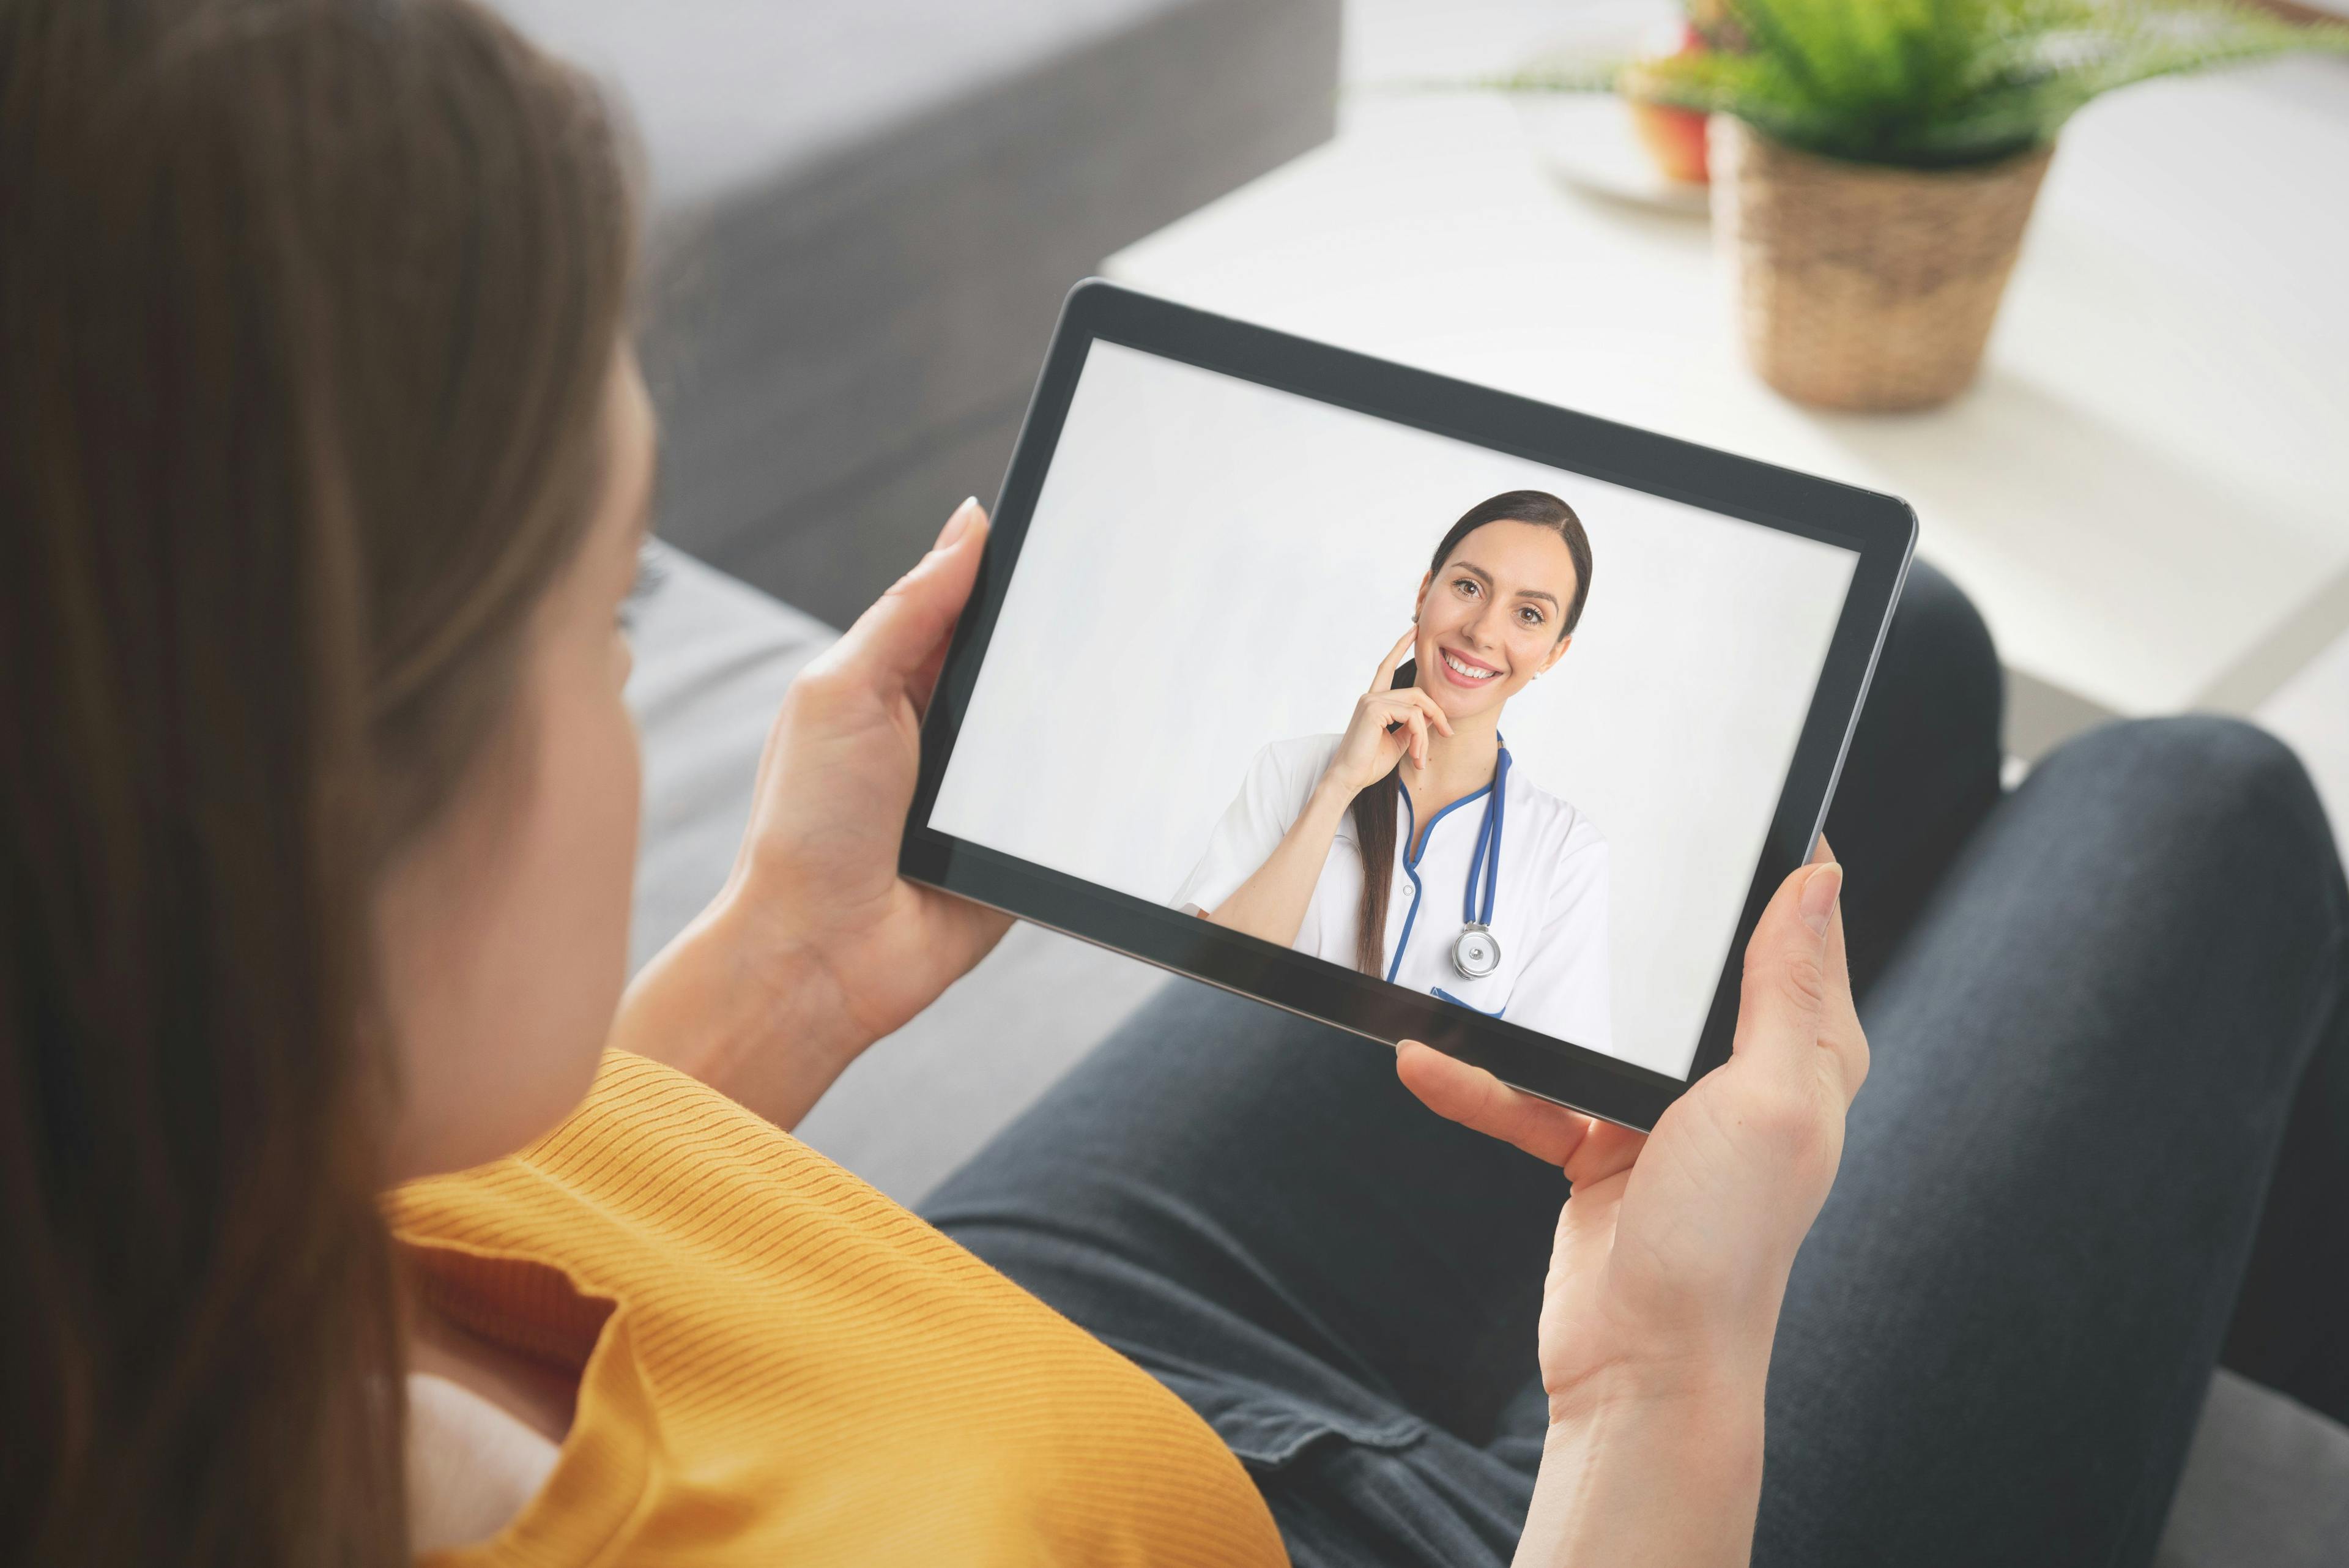 Guide to effective virtual visits during COVID-19